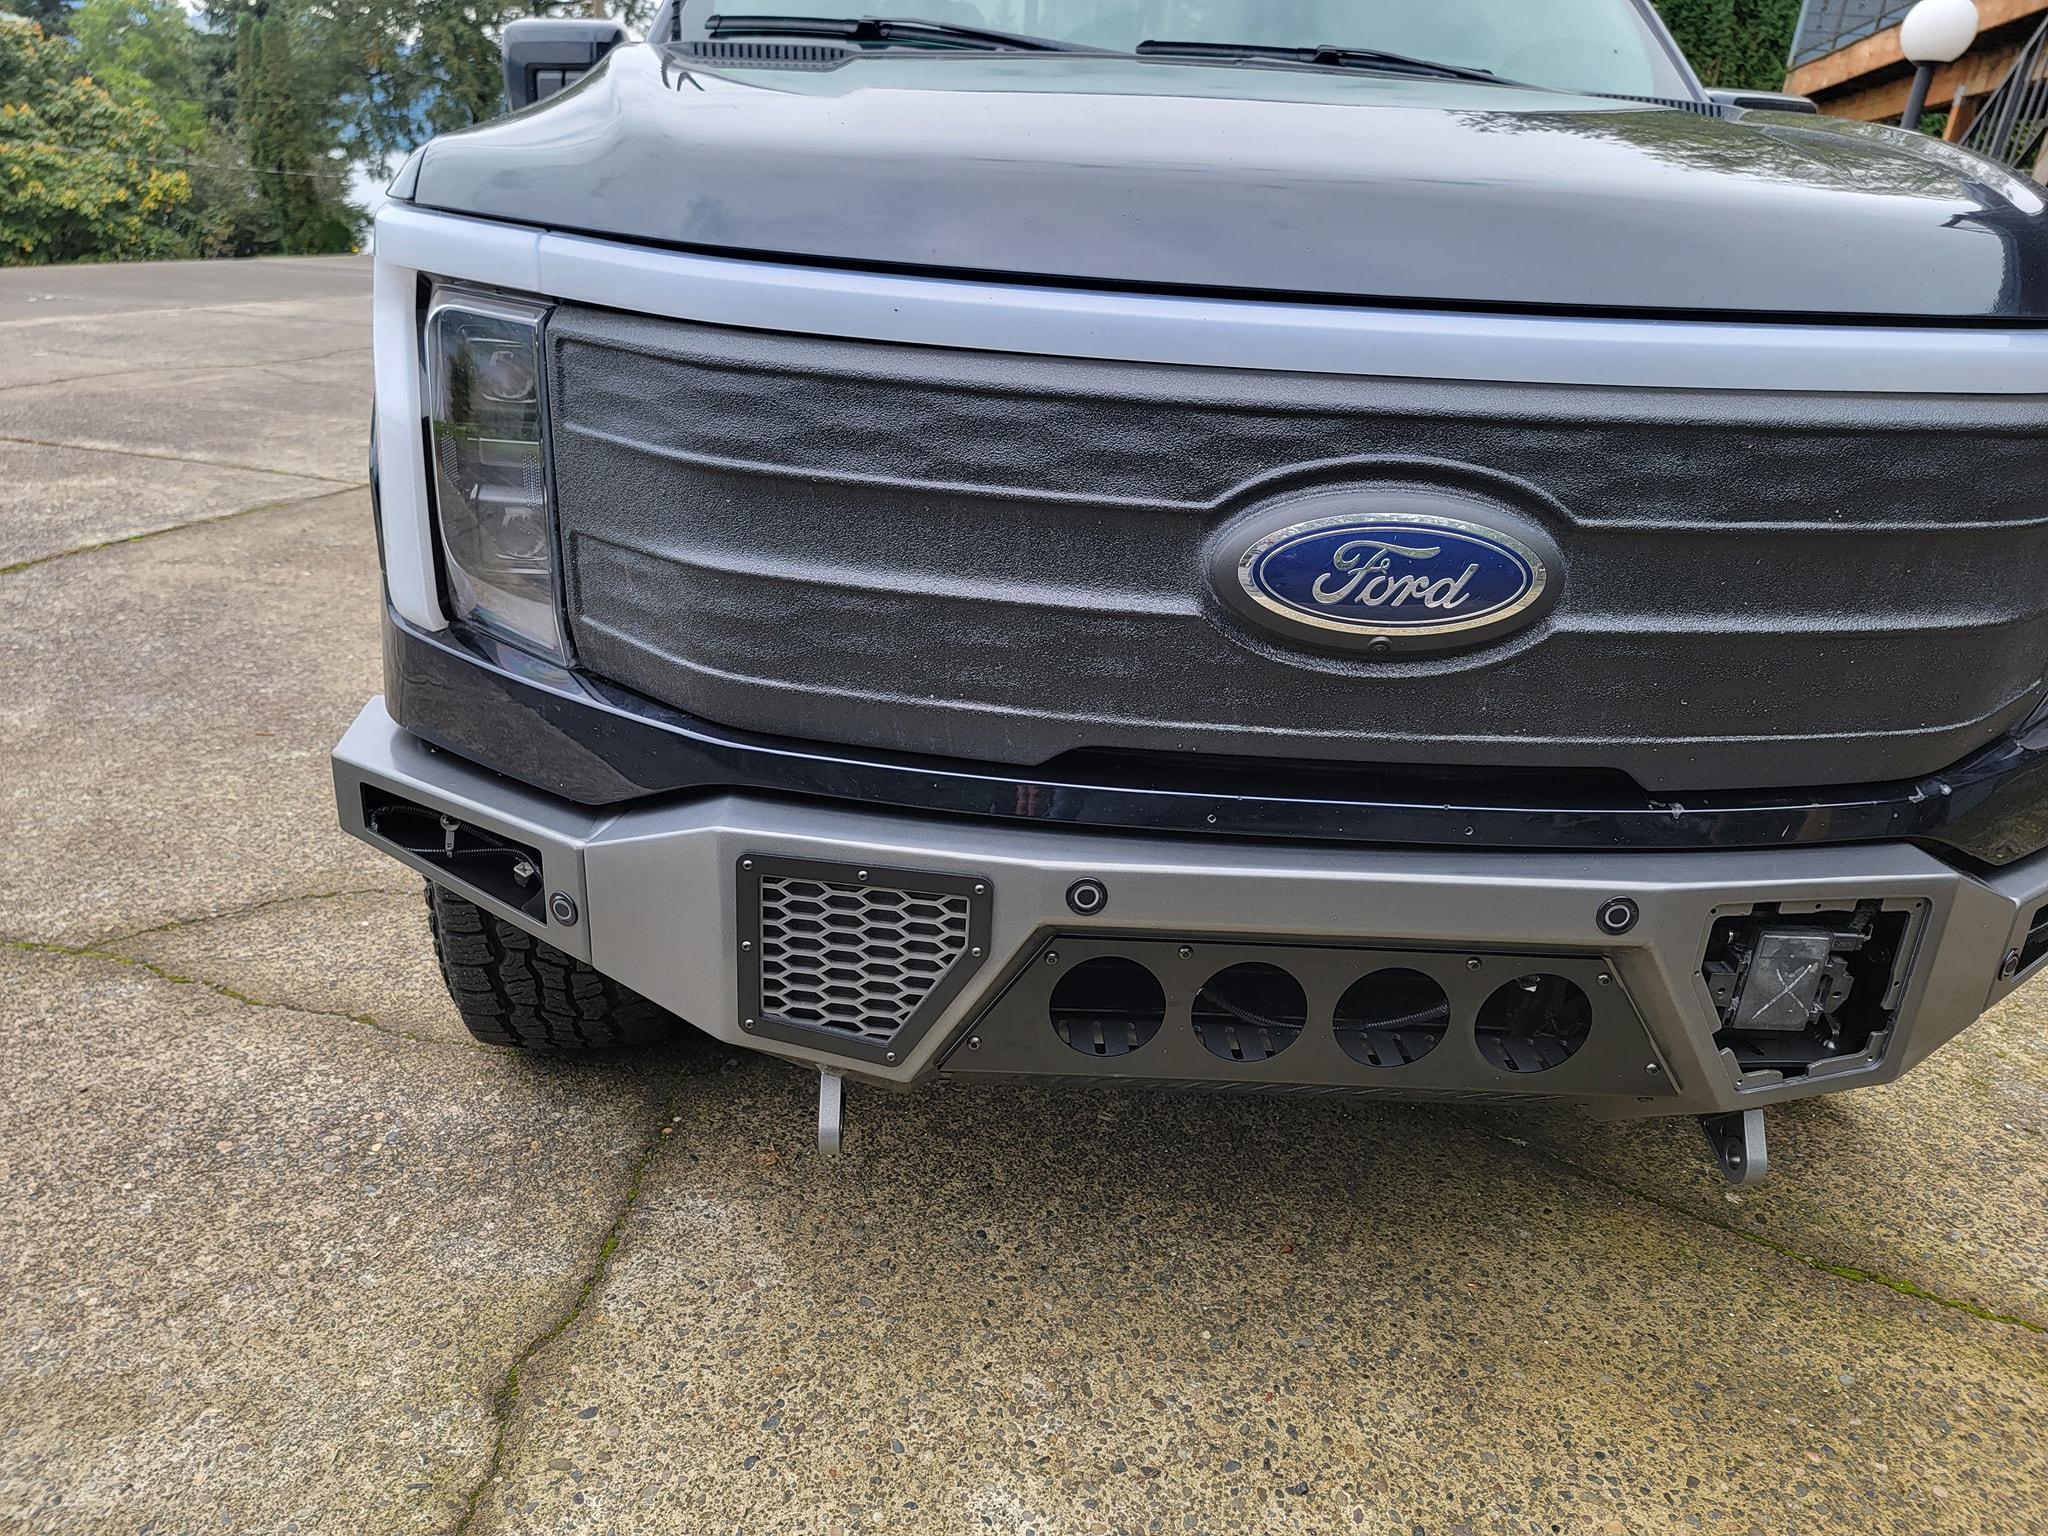 Ford F-150 Lightning Will aftermarket f150 bumpers work? 387220219_10228731319763913_9144323885497573320rill_n